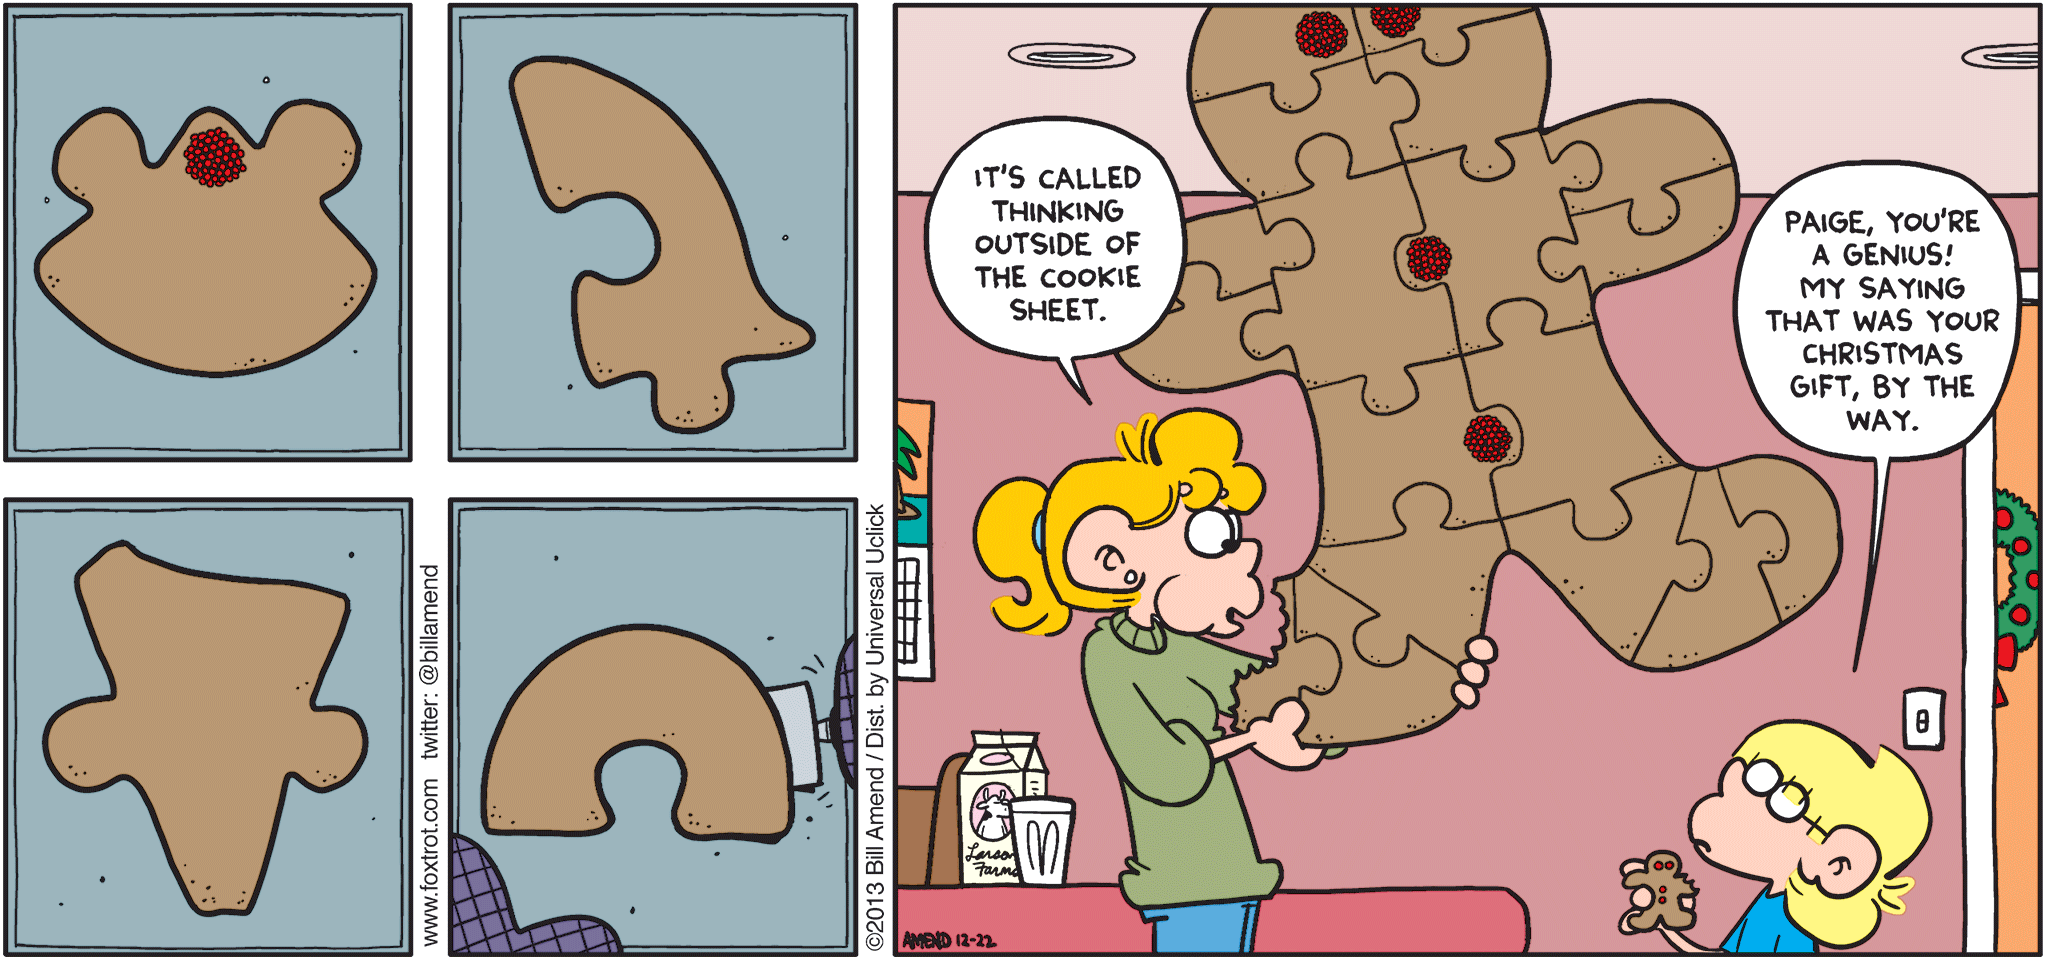 FoxTrot by Bill Amend - "Some Assembly Desired" published December 22, 2013 - Paige: It's called thinking outside the cookie sheet. Jason: Paige, you're a genius! My saying that was your Christmas gift, by the way.